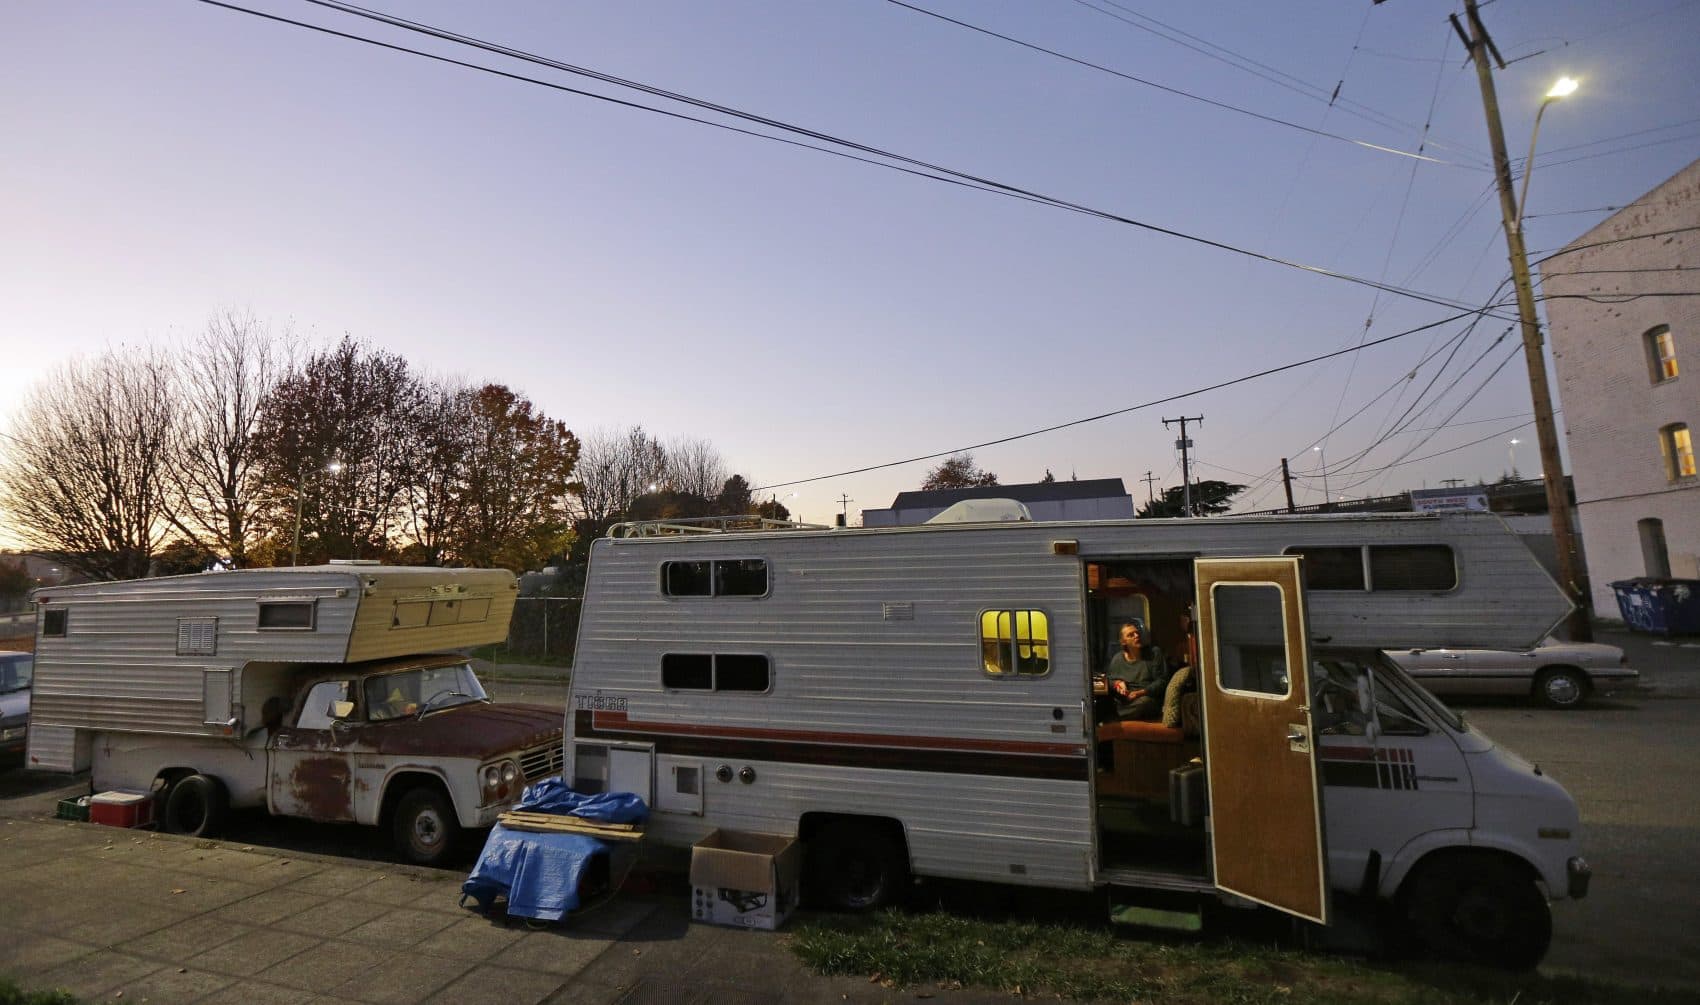 Timmings and his RV parked just north of Boeing Field, the King County International Airport, along with a group of fellow RV-dwellers who are periodically told by the city to move their vehicles -- even if just across the street -- or risk having them towed away. (Ted S. Warren/AP)